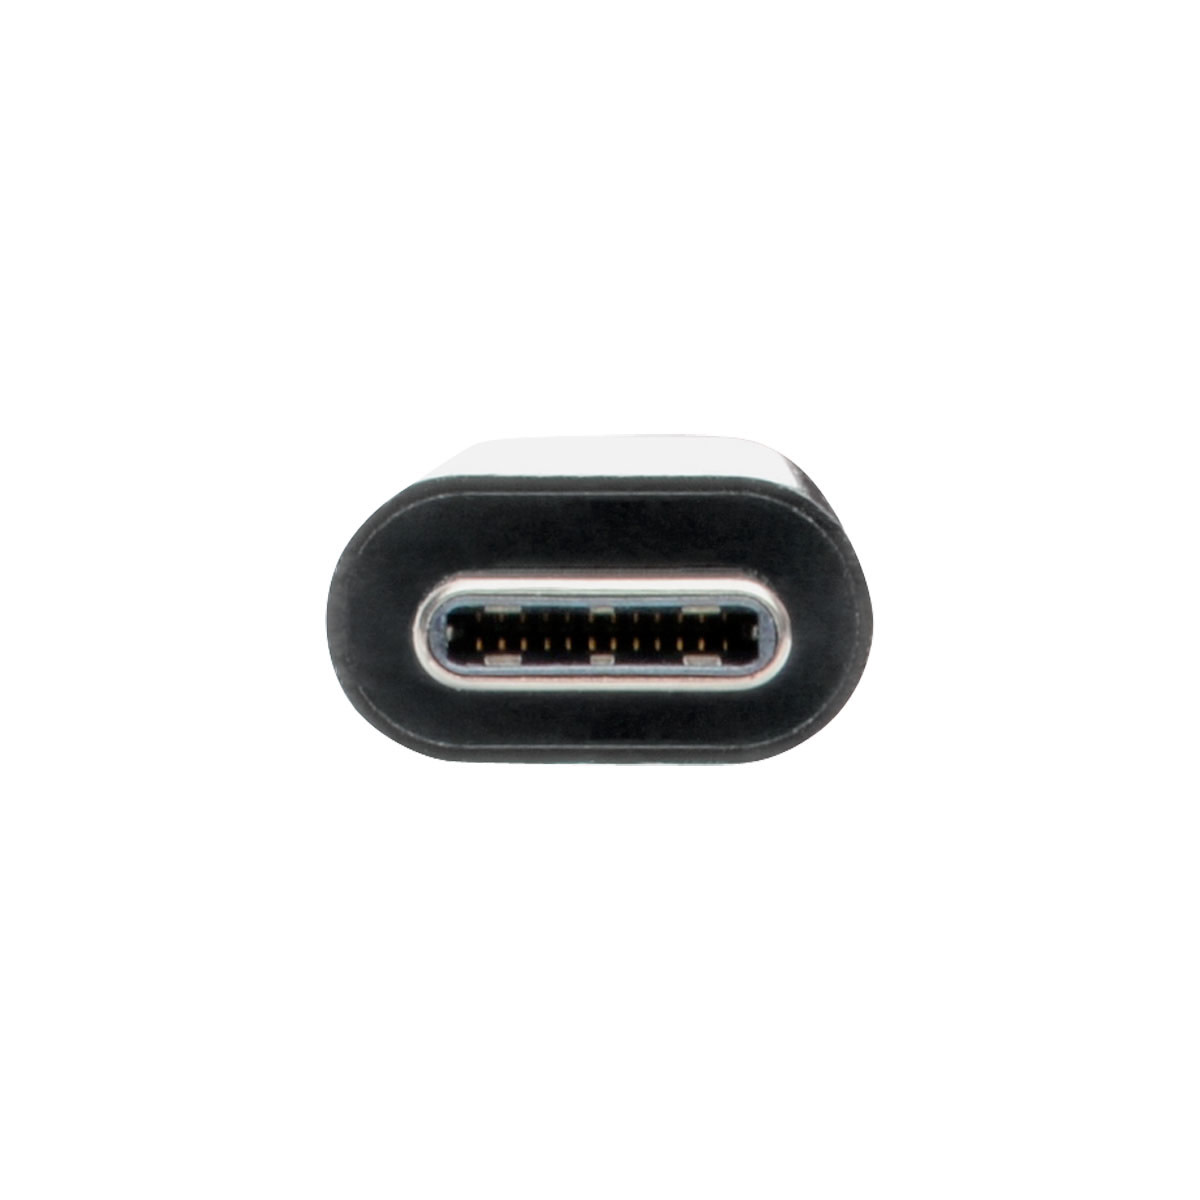 USB C to HDMI Multiport Adapter Dock